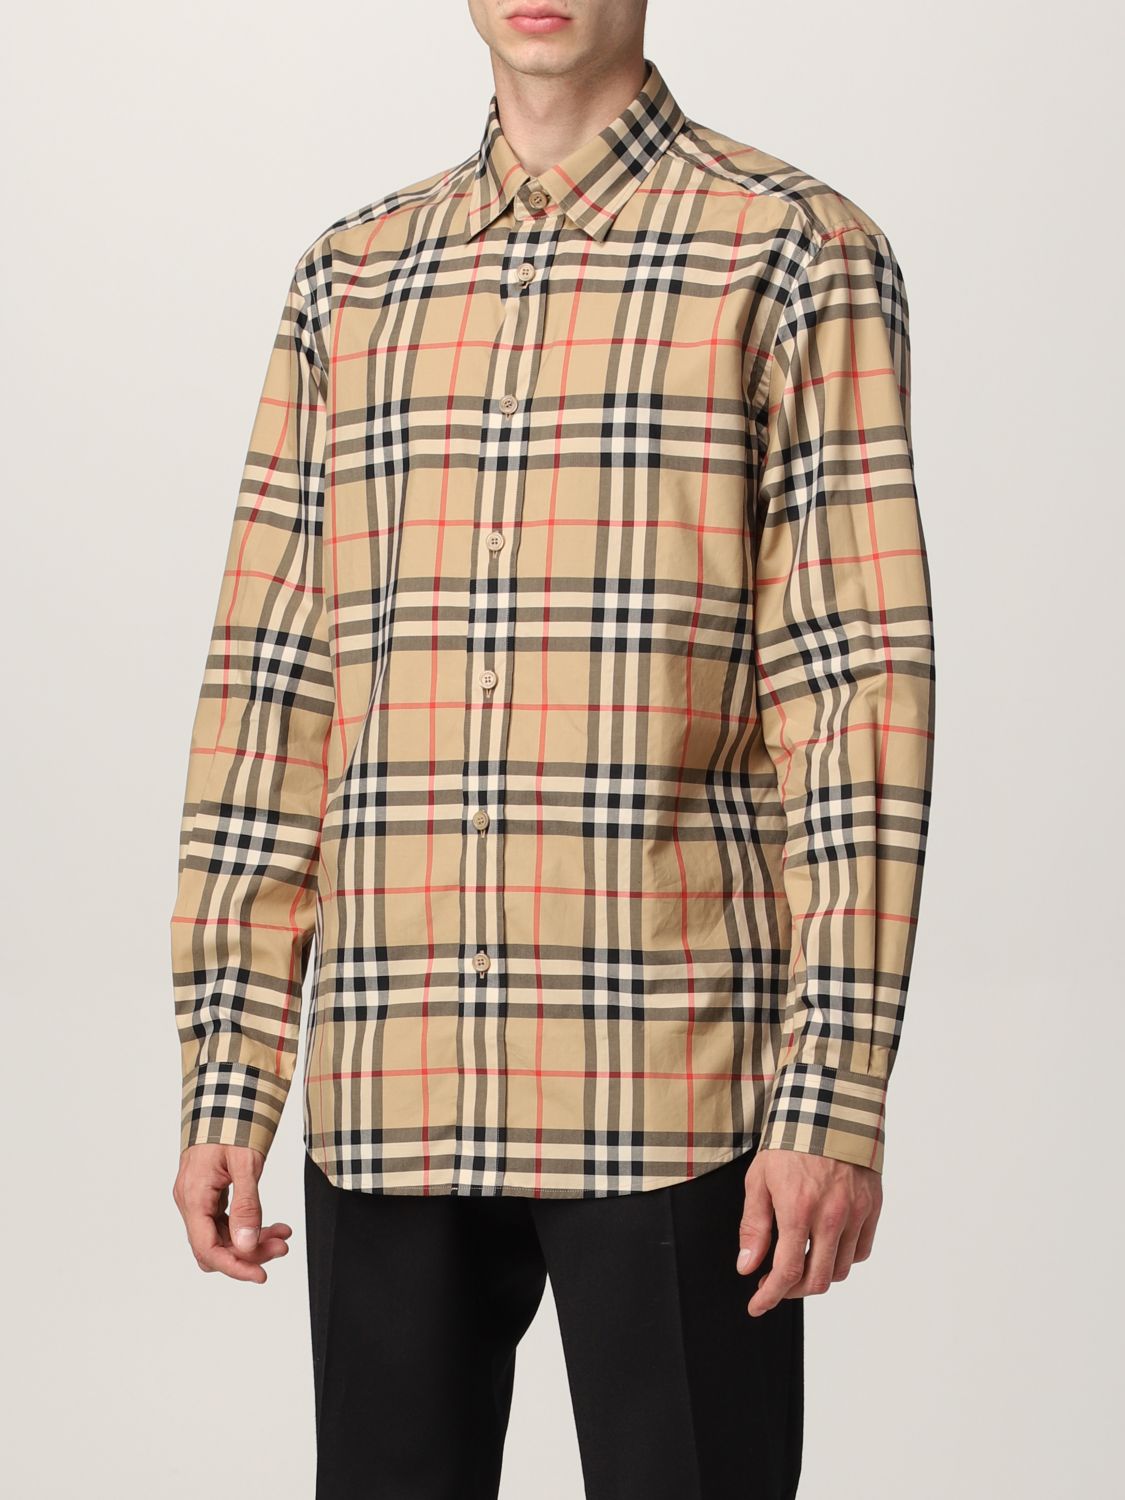 BURBERRY: Caxton shirt in cotton poplin with check | Shirt Burberry | Shirt Burberry 8020863 GIGLIO.COM